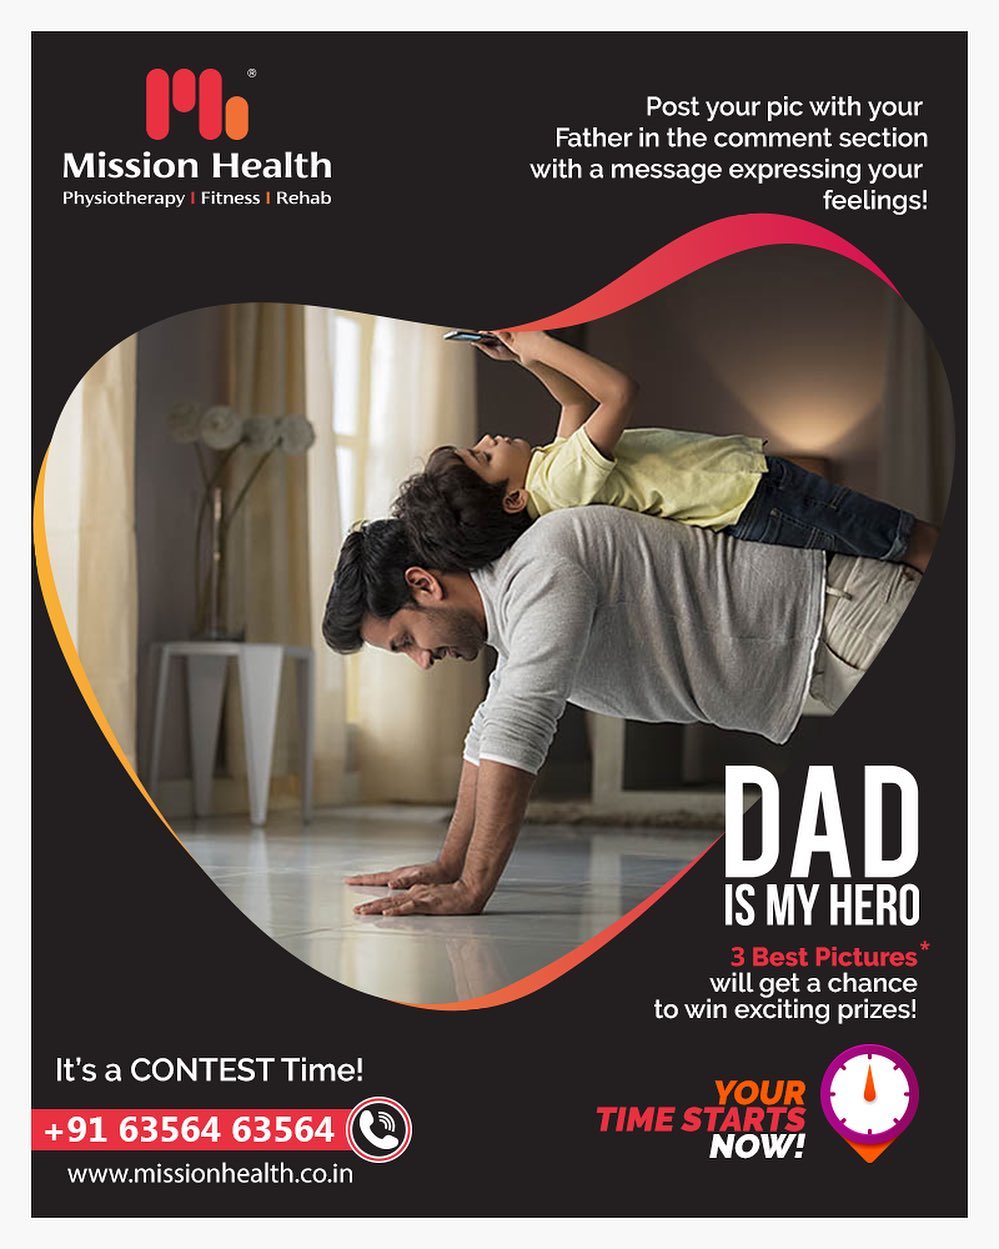 It’s a CONTEST Time!
Express your feeling towards your father. Share the best picture with your father in the comment/tag and get a chance to win exciting prizes!

#FathersDay #Contest #MissionHealthIndia #MovementIsLife #AbilityClinic #MissionHealth #healthylifestyle